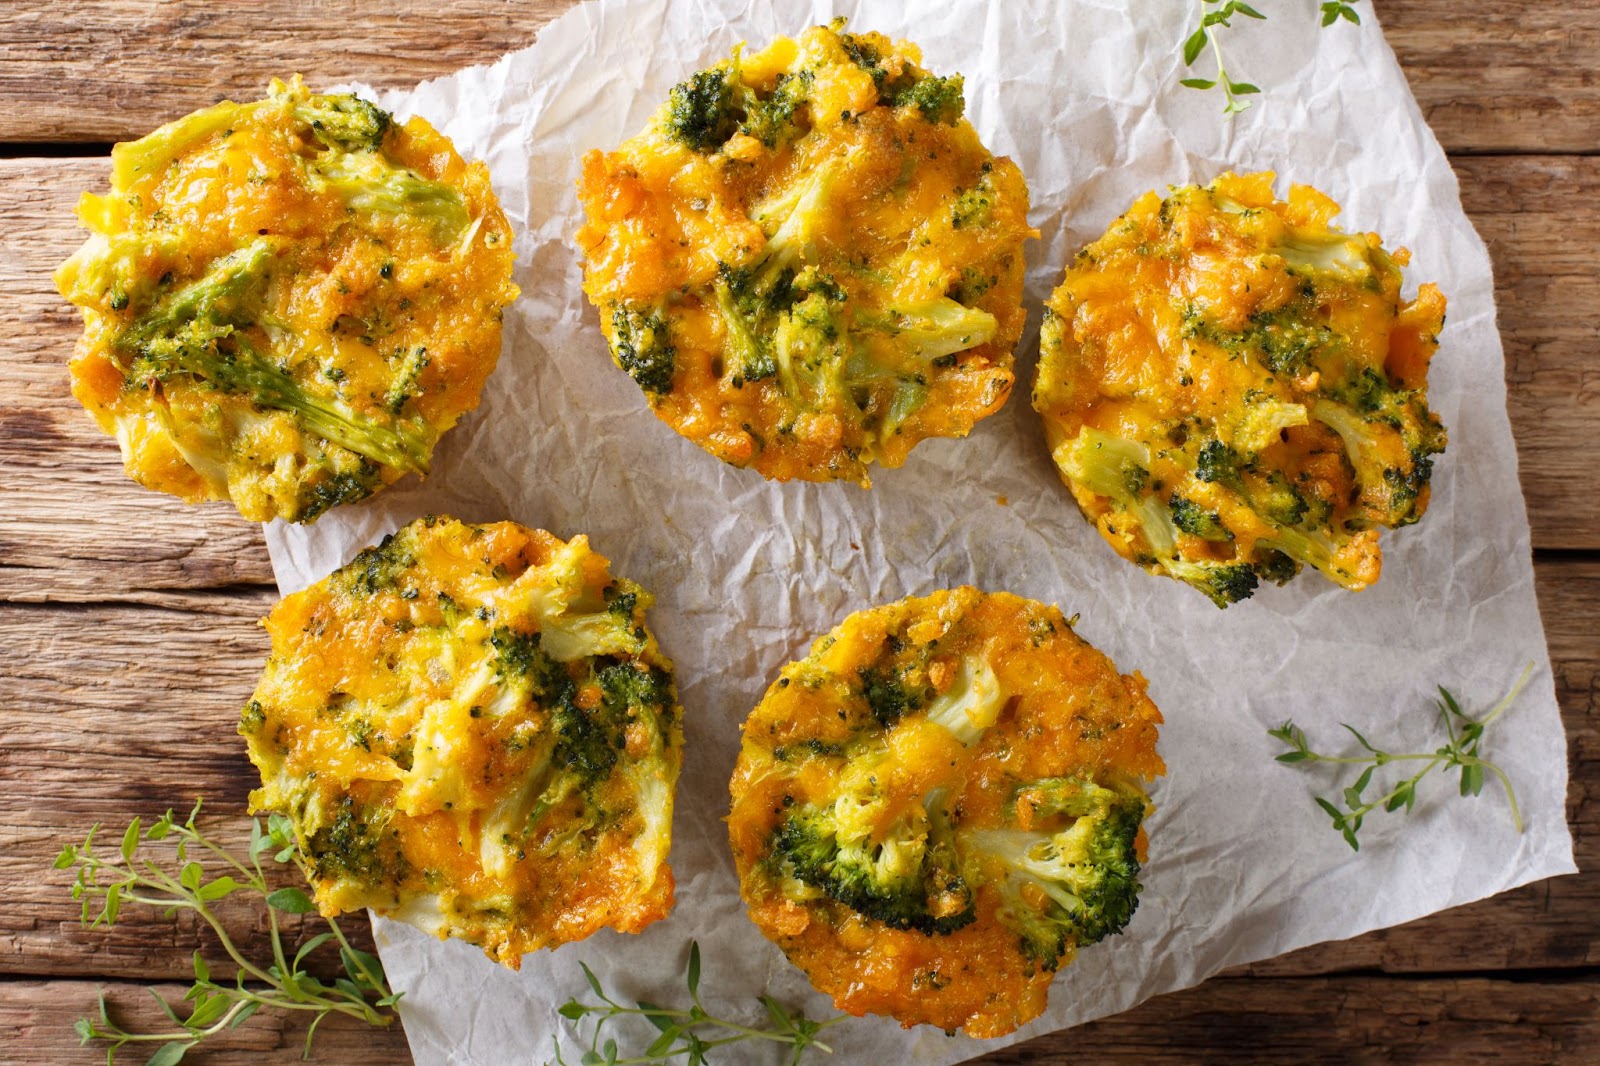 Egg frittata bites with broccoli and cheddar